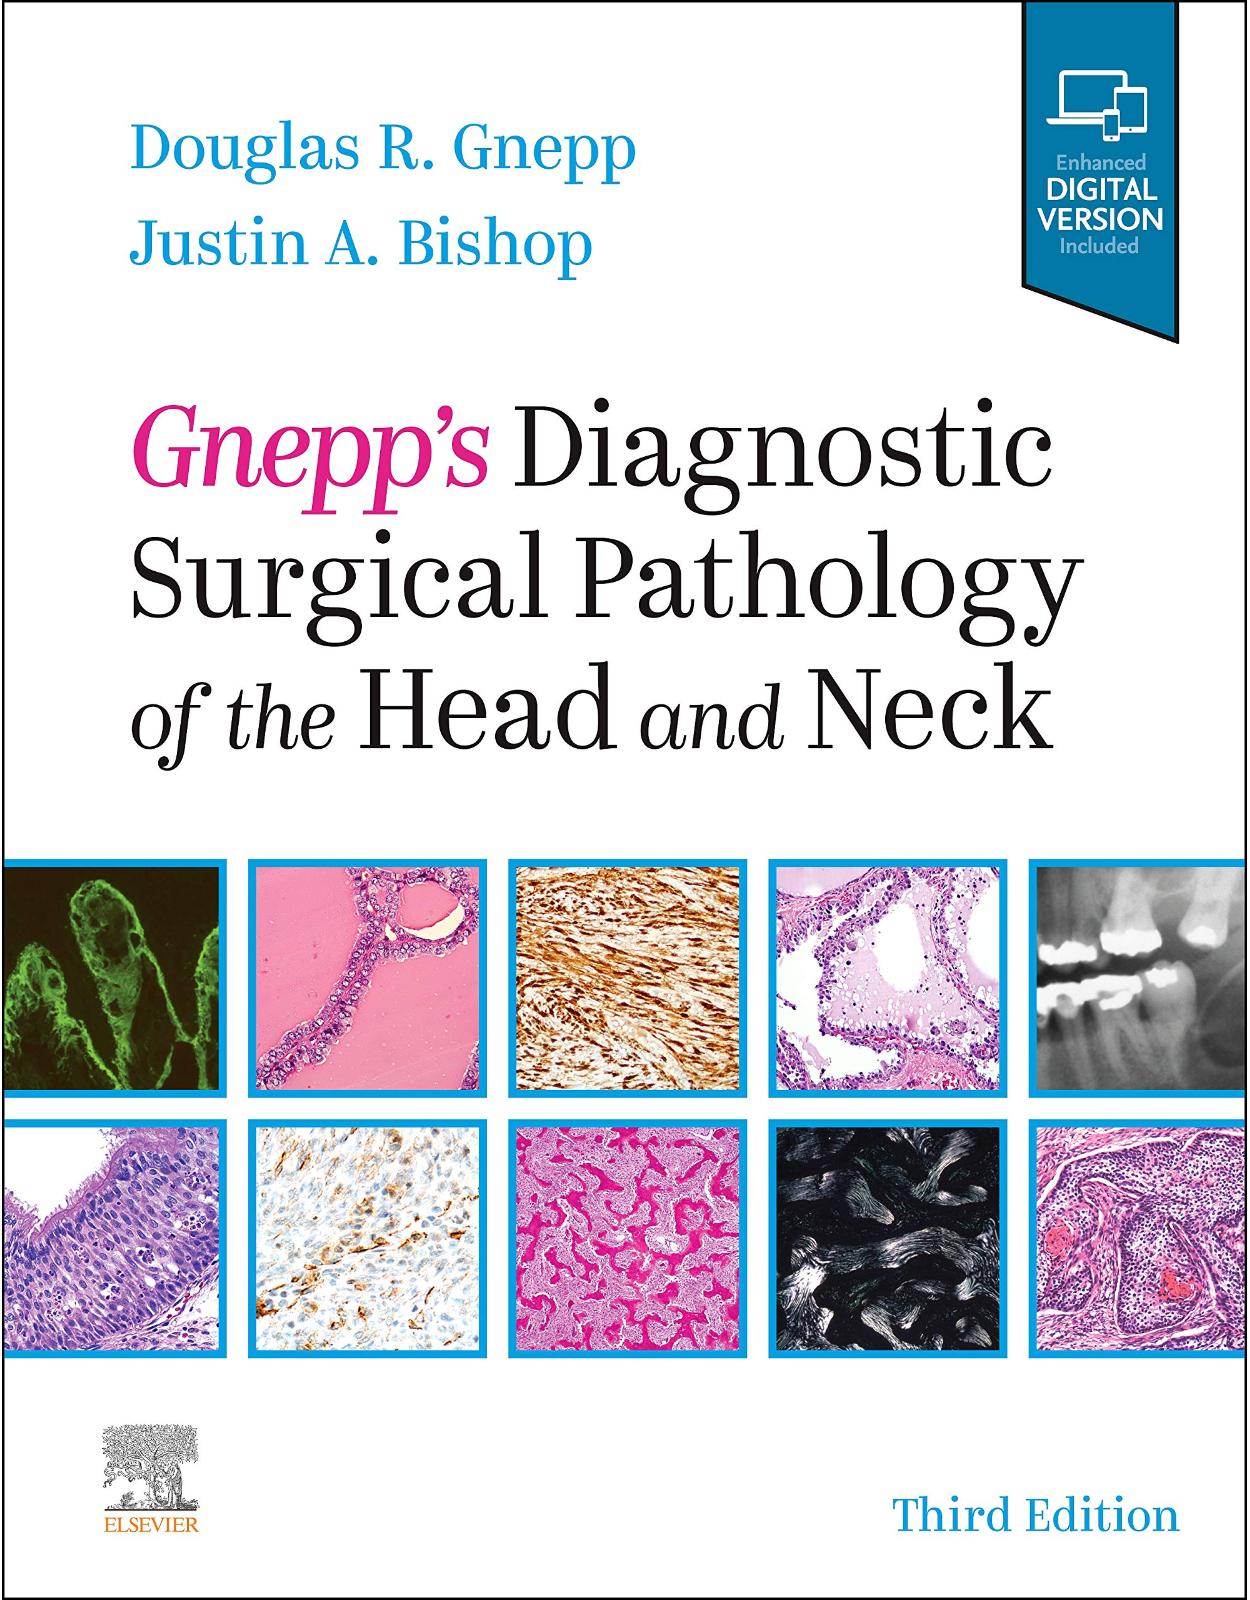 Gnepp's Diagnostic Surgical Pathology of the Head and Neck: Expert Consult - Online and Print